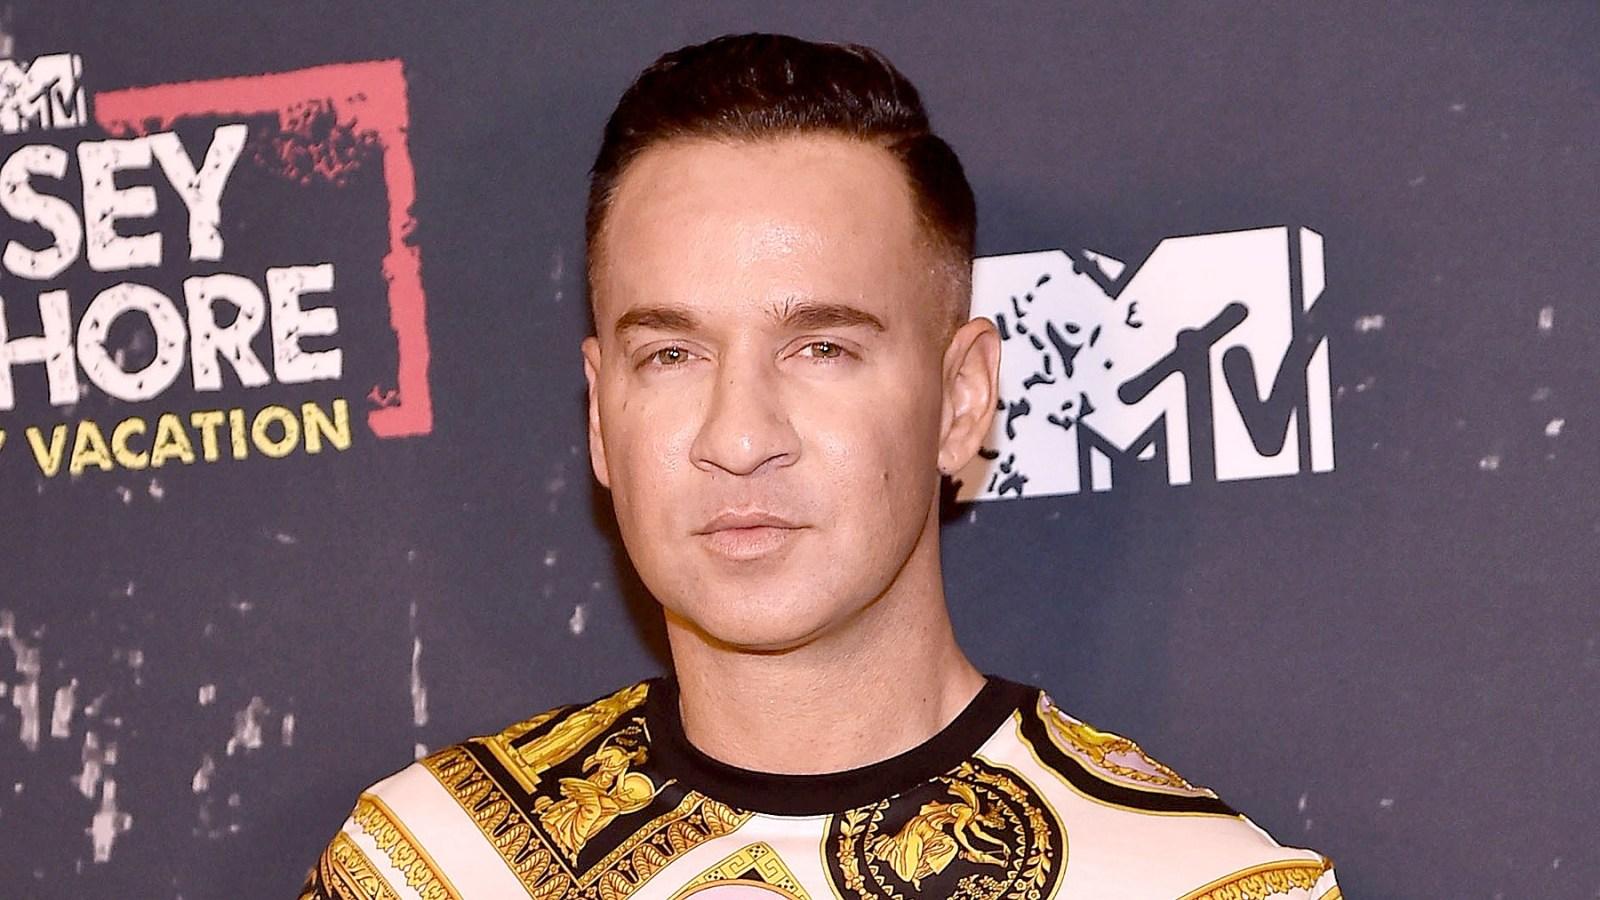 Mike 'The Situation' Sorrentino's Jail Time for Tax Evasion to Start